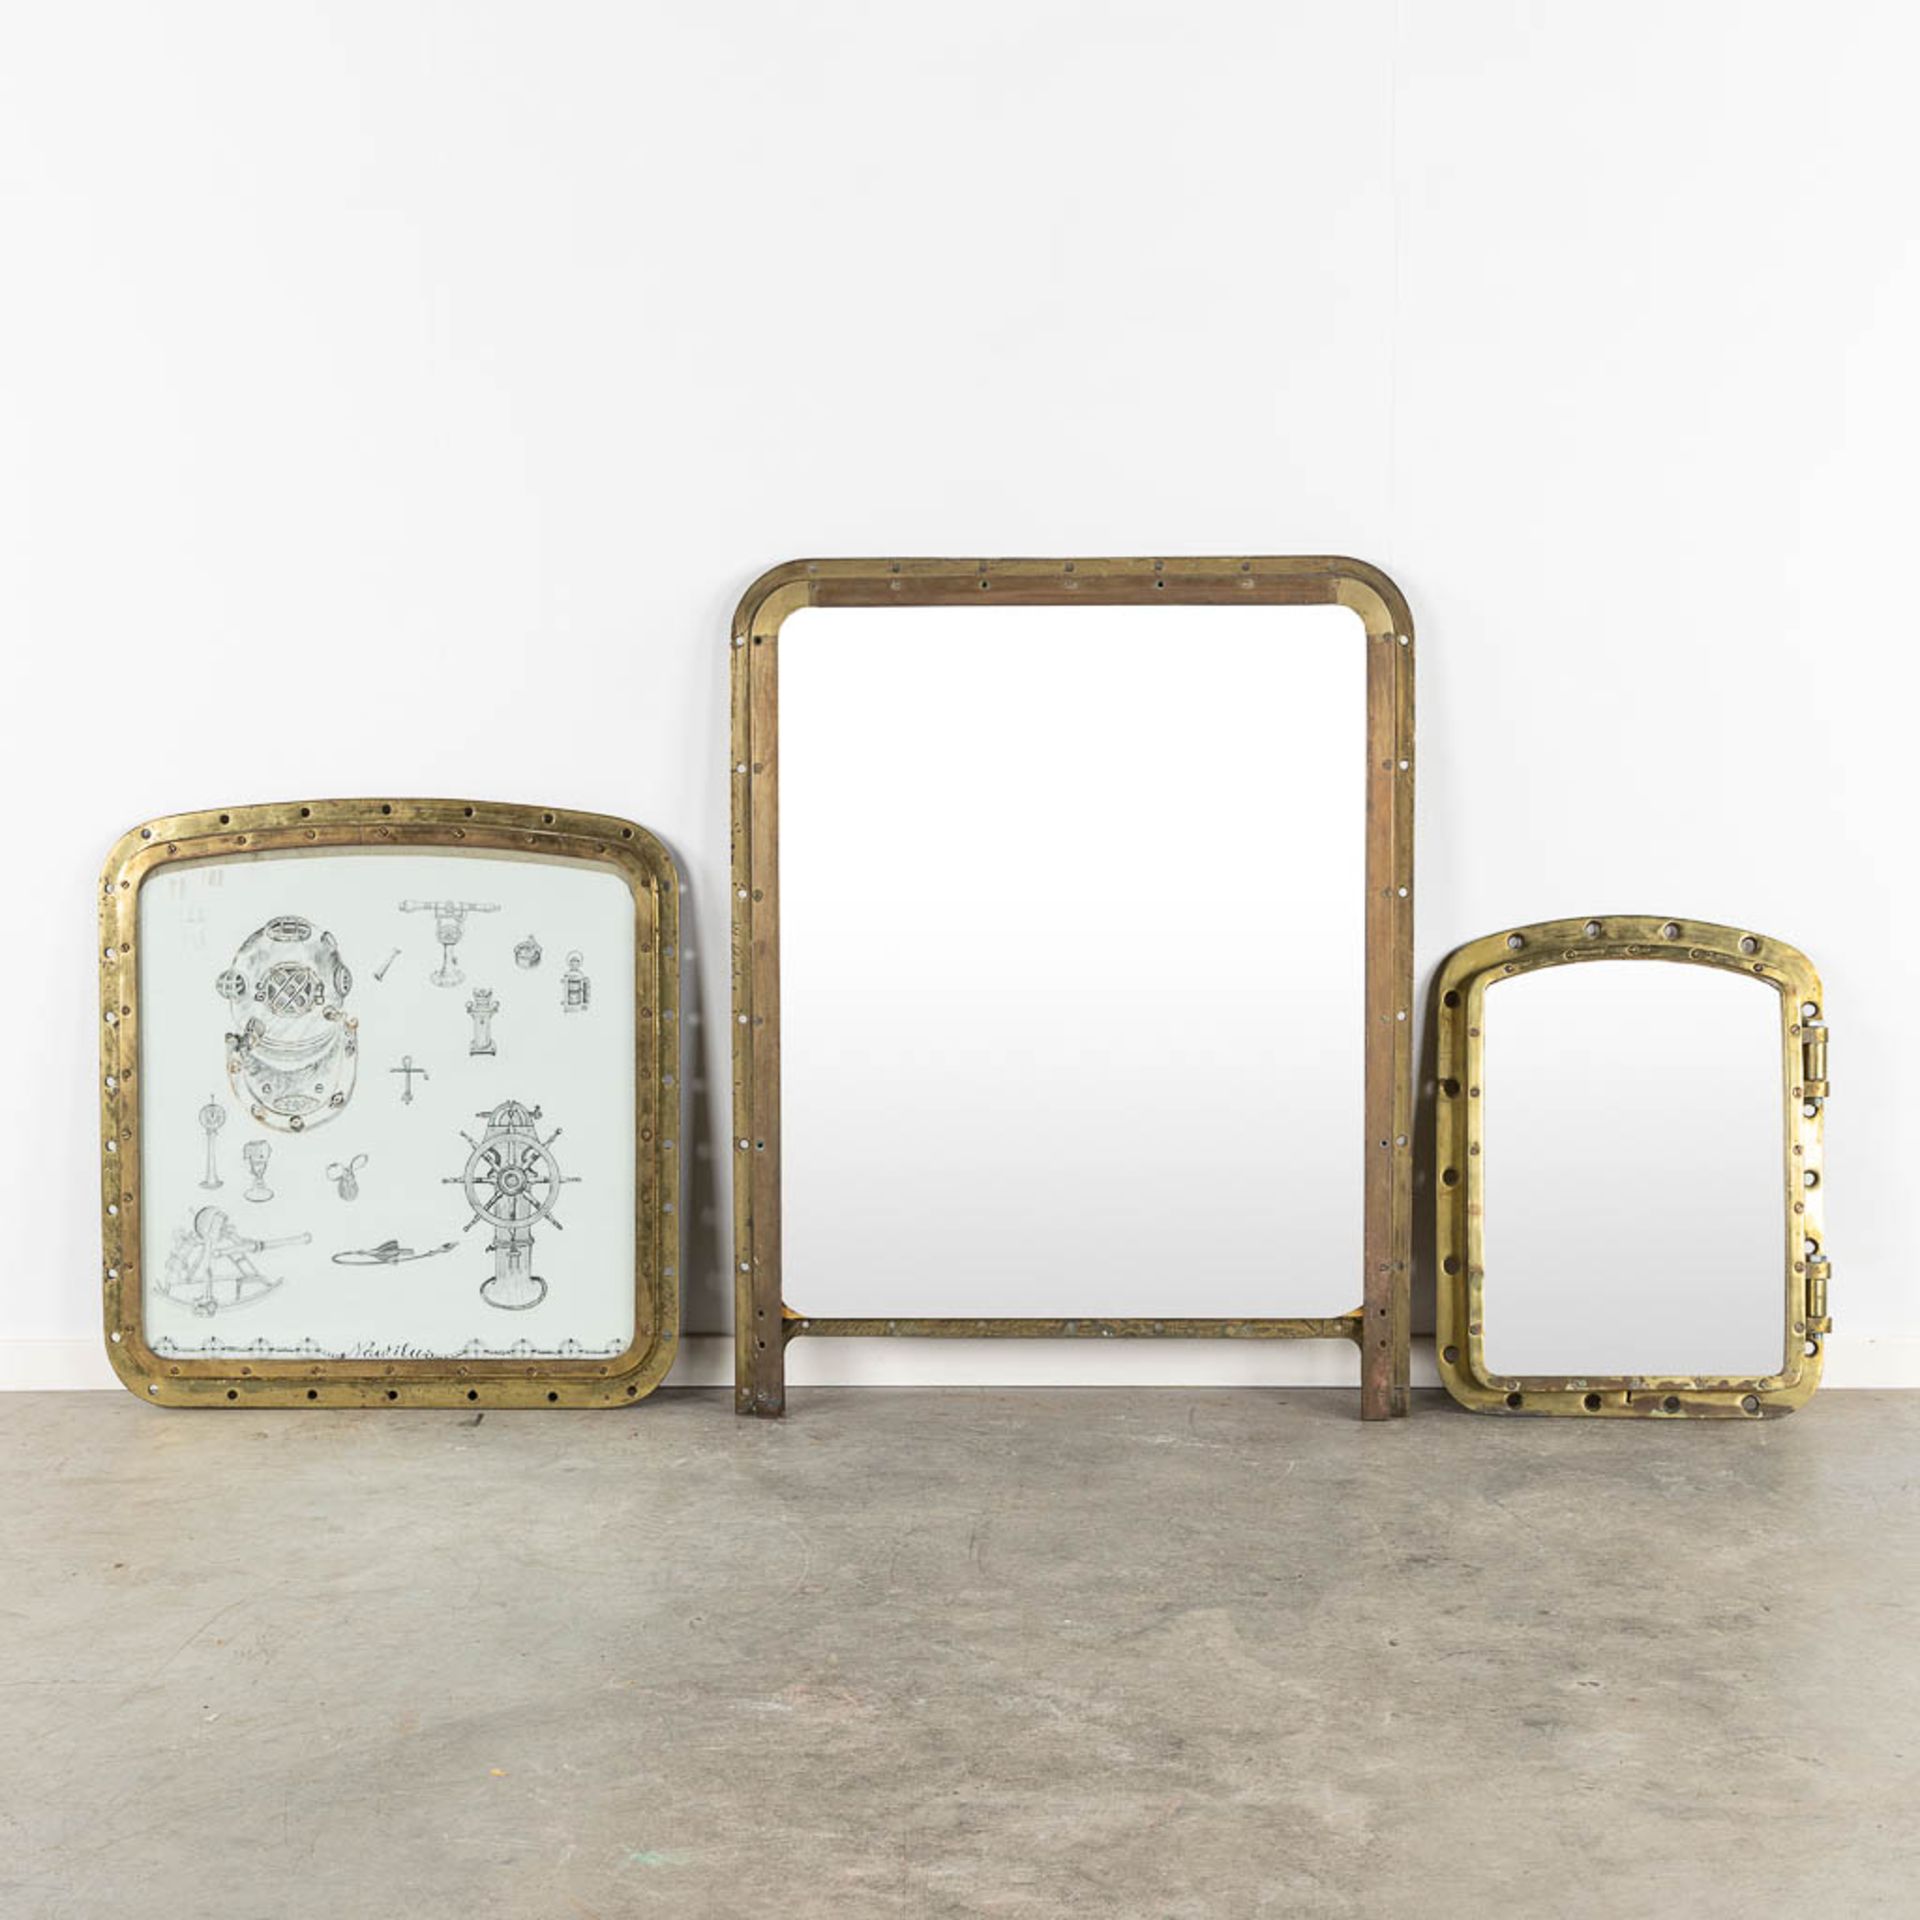 Three various Portholes, bronze and glass. Two changed into a mirror. (W:86 x H:110 cm)